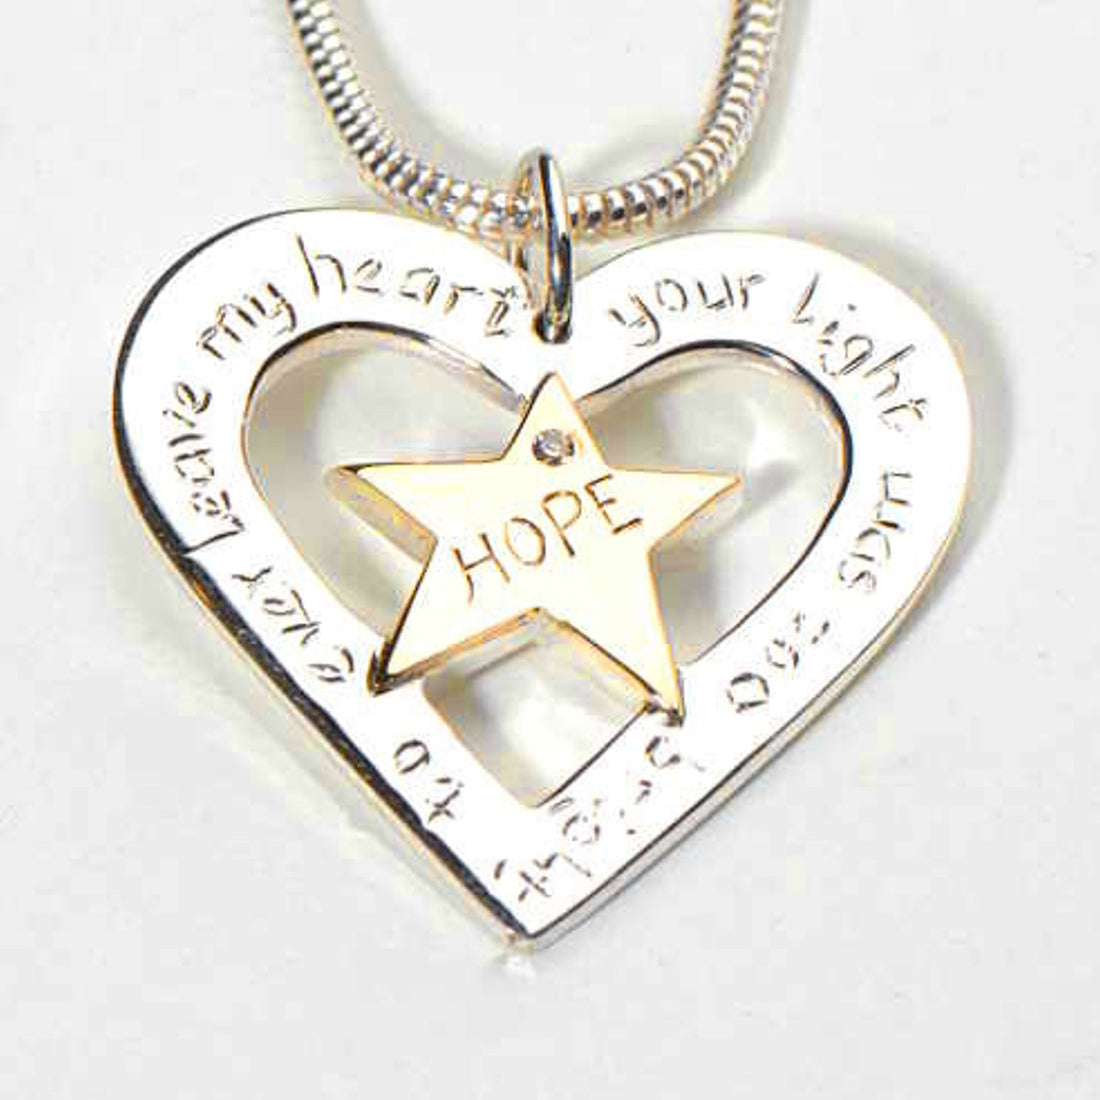 Jewellery with personal meaning to celebrate the life of a child.